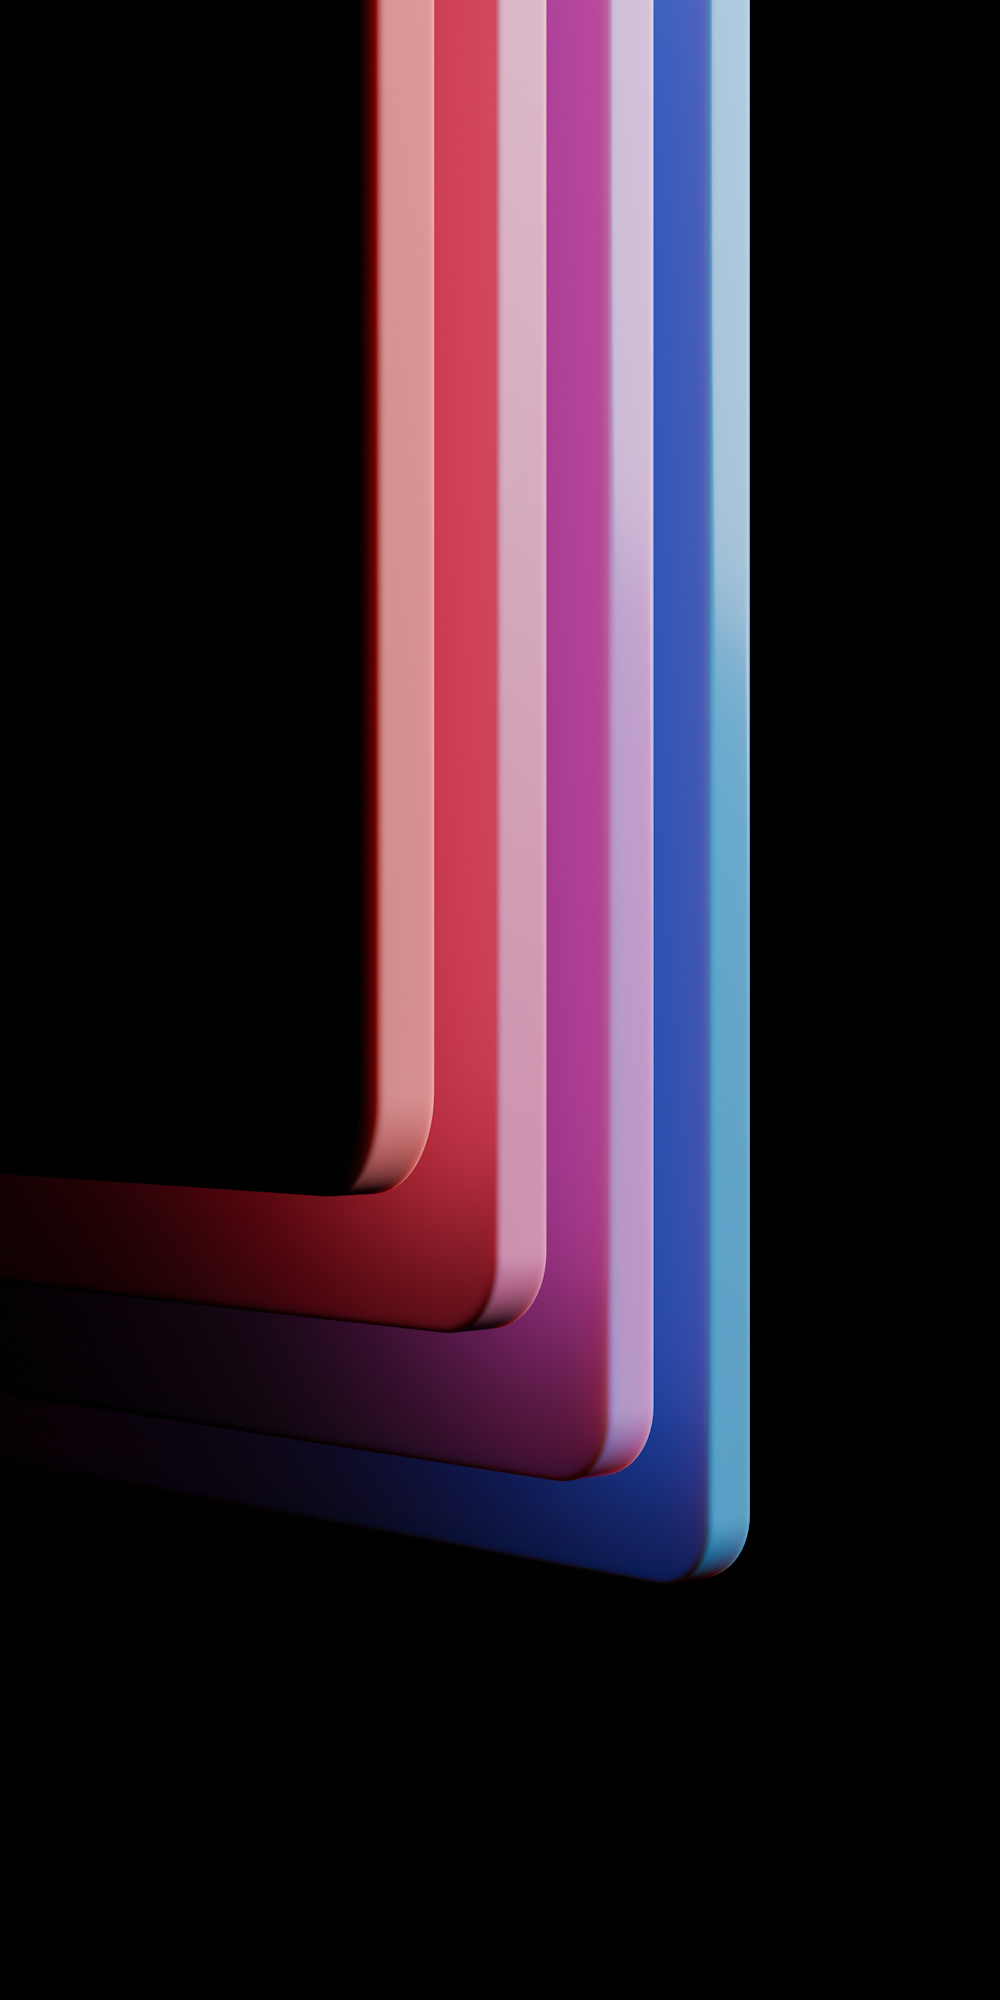 a red and blue striped logo